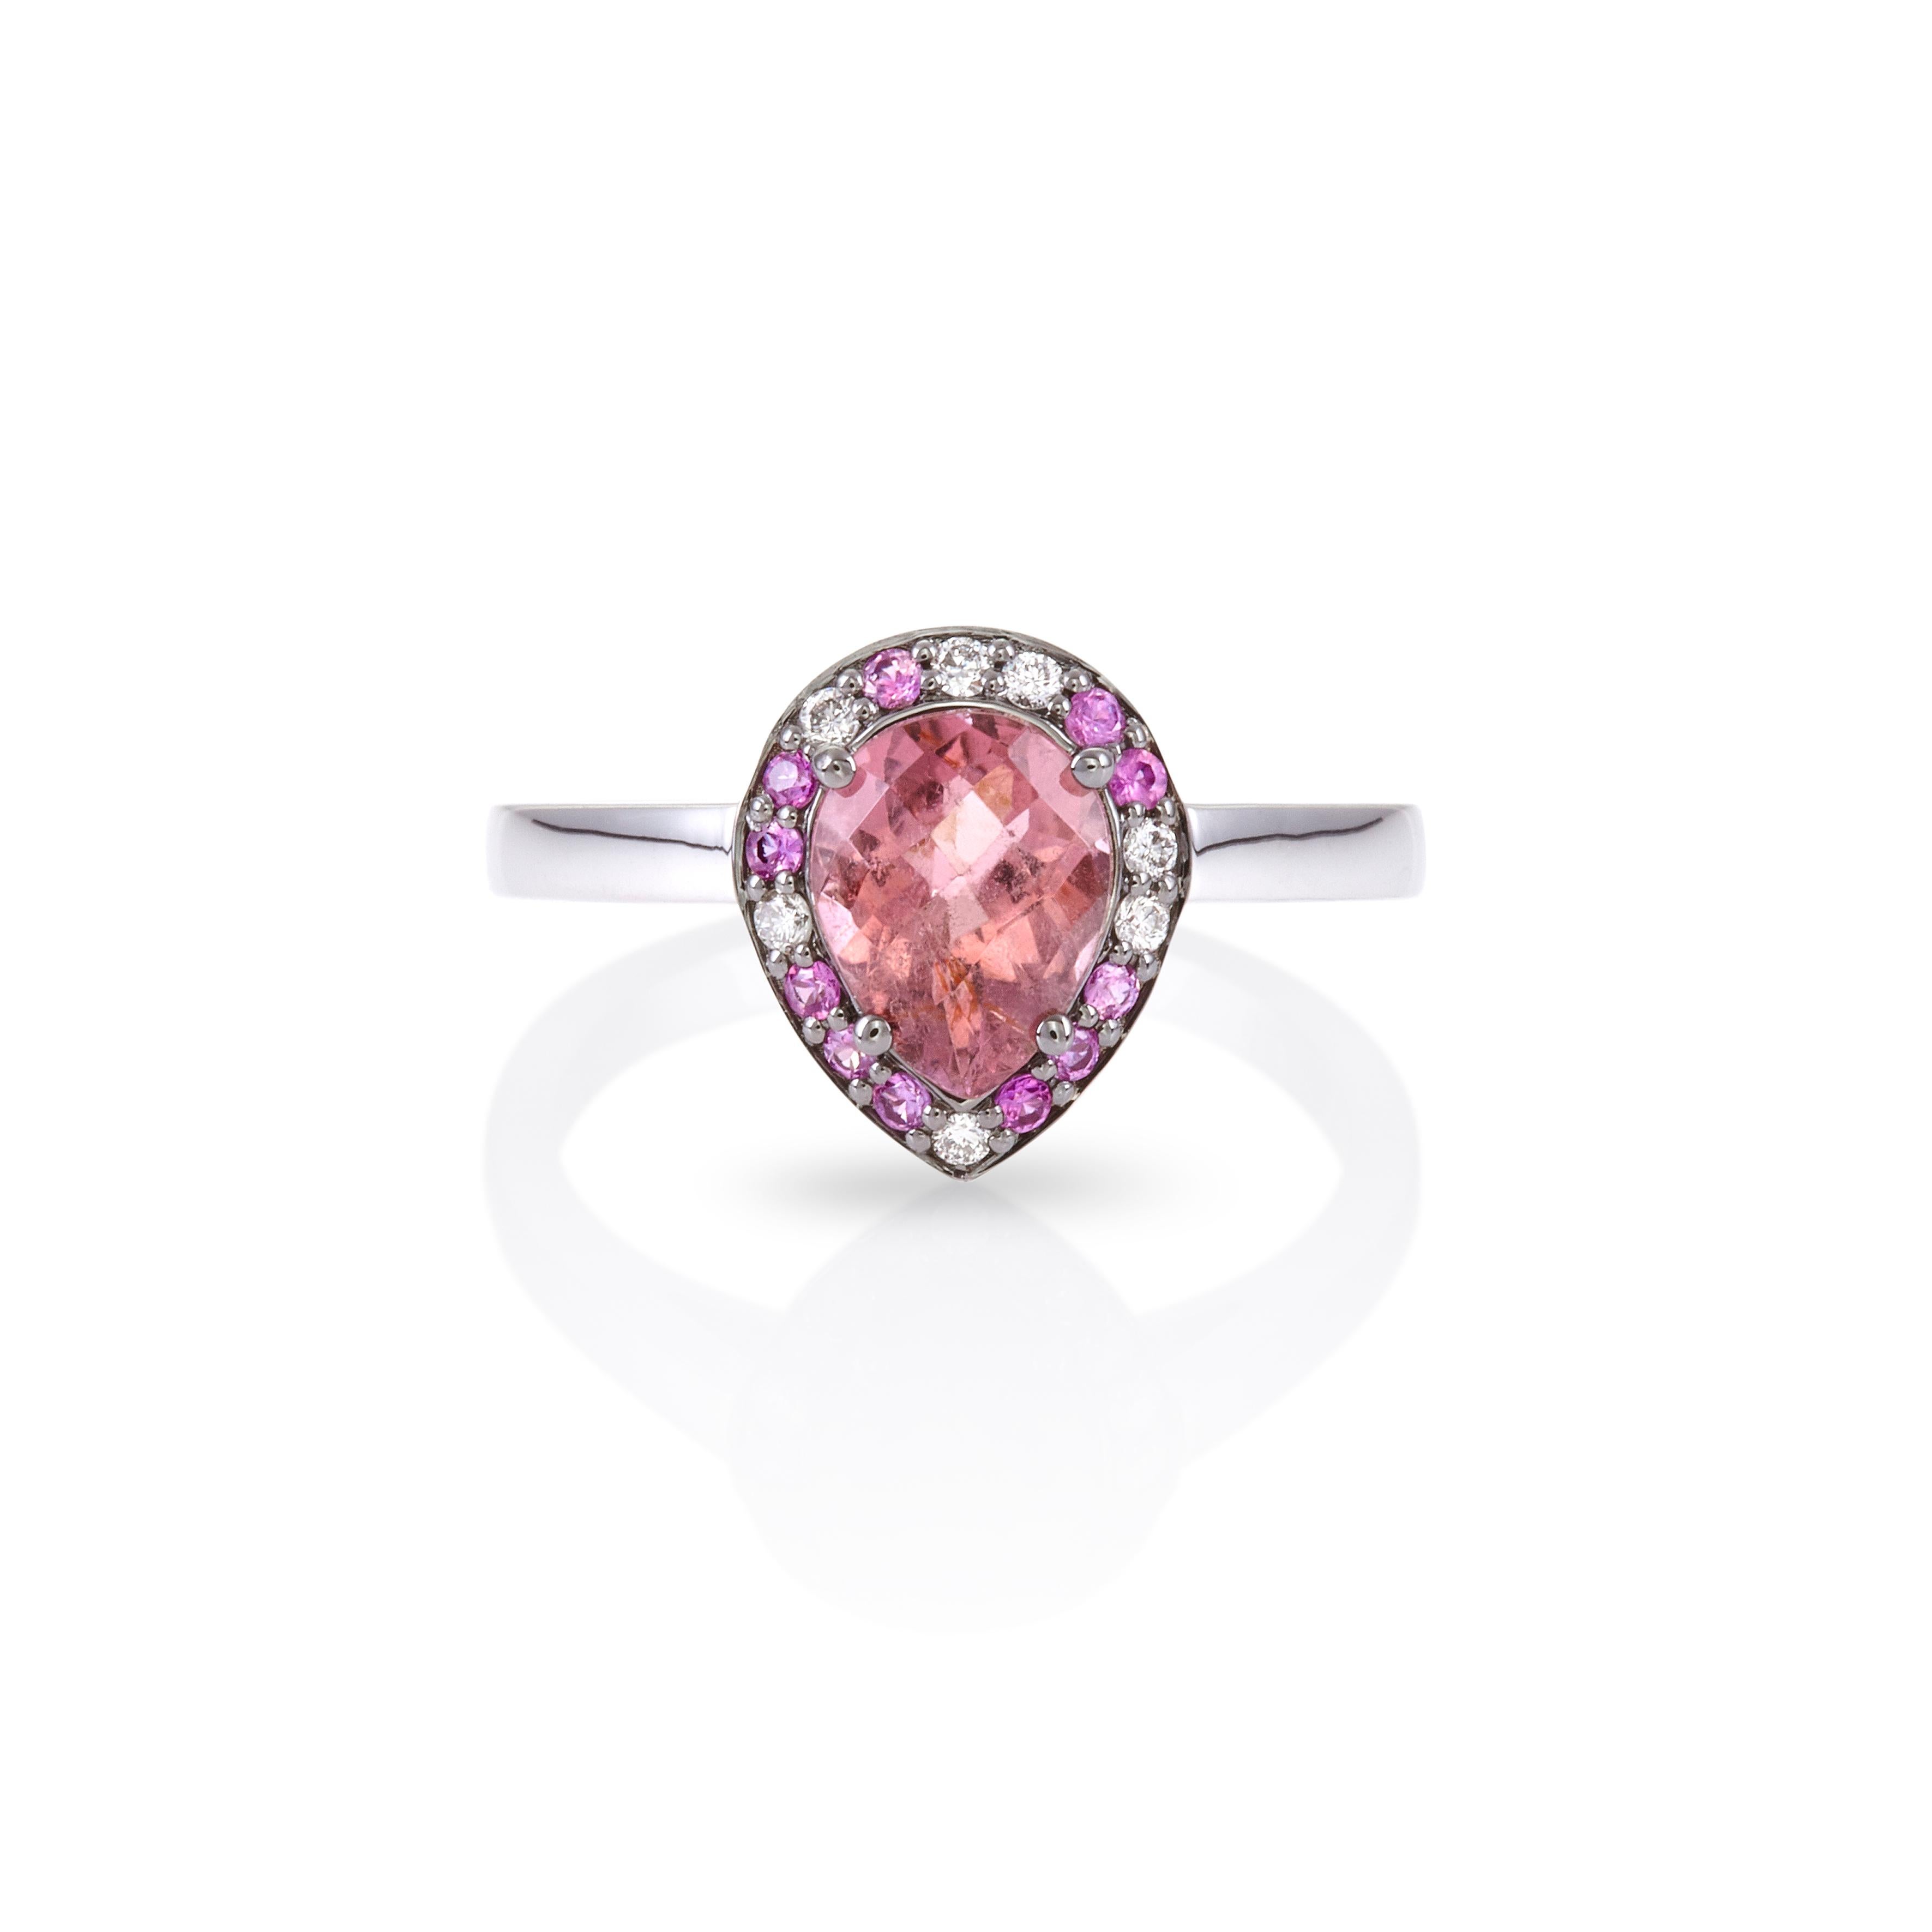 For Sale:  Colorful Drop Ring 18Kt White Gold with Red Tourmaline Pink Saphires and Diamond 2